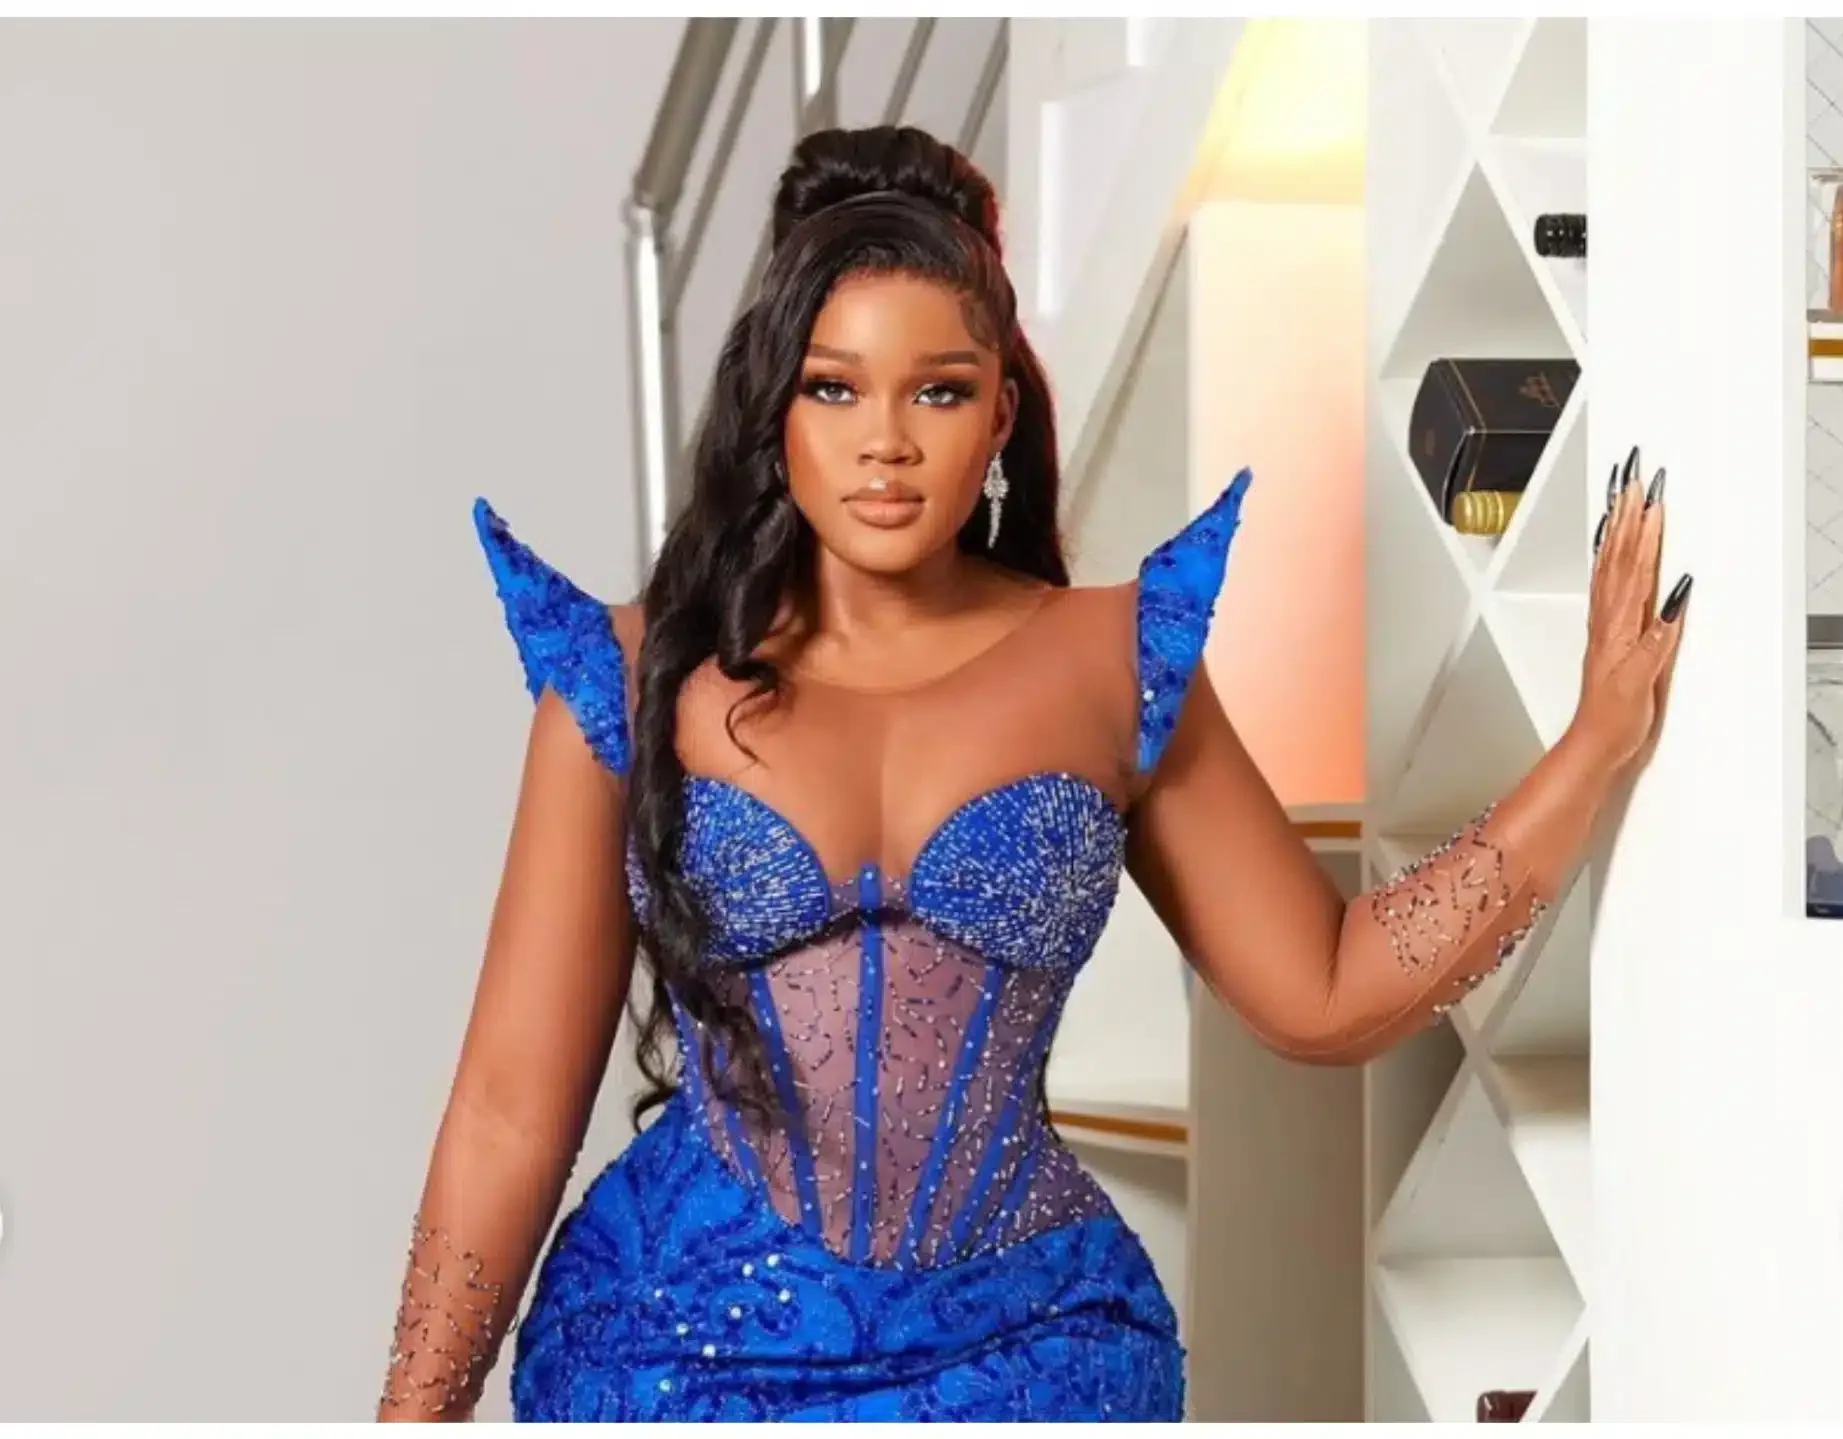 "The bathroom glass door collapsed on me" - Ceec reveals she had an accident in BBN house